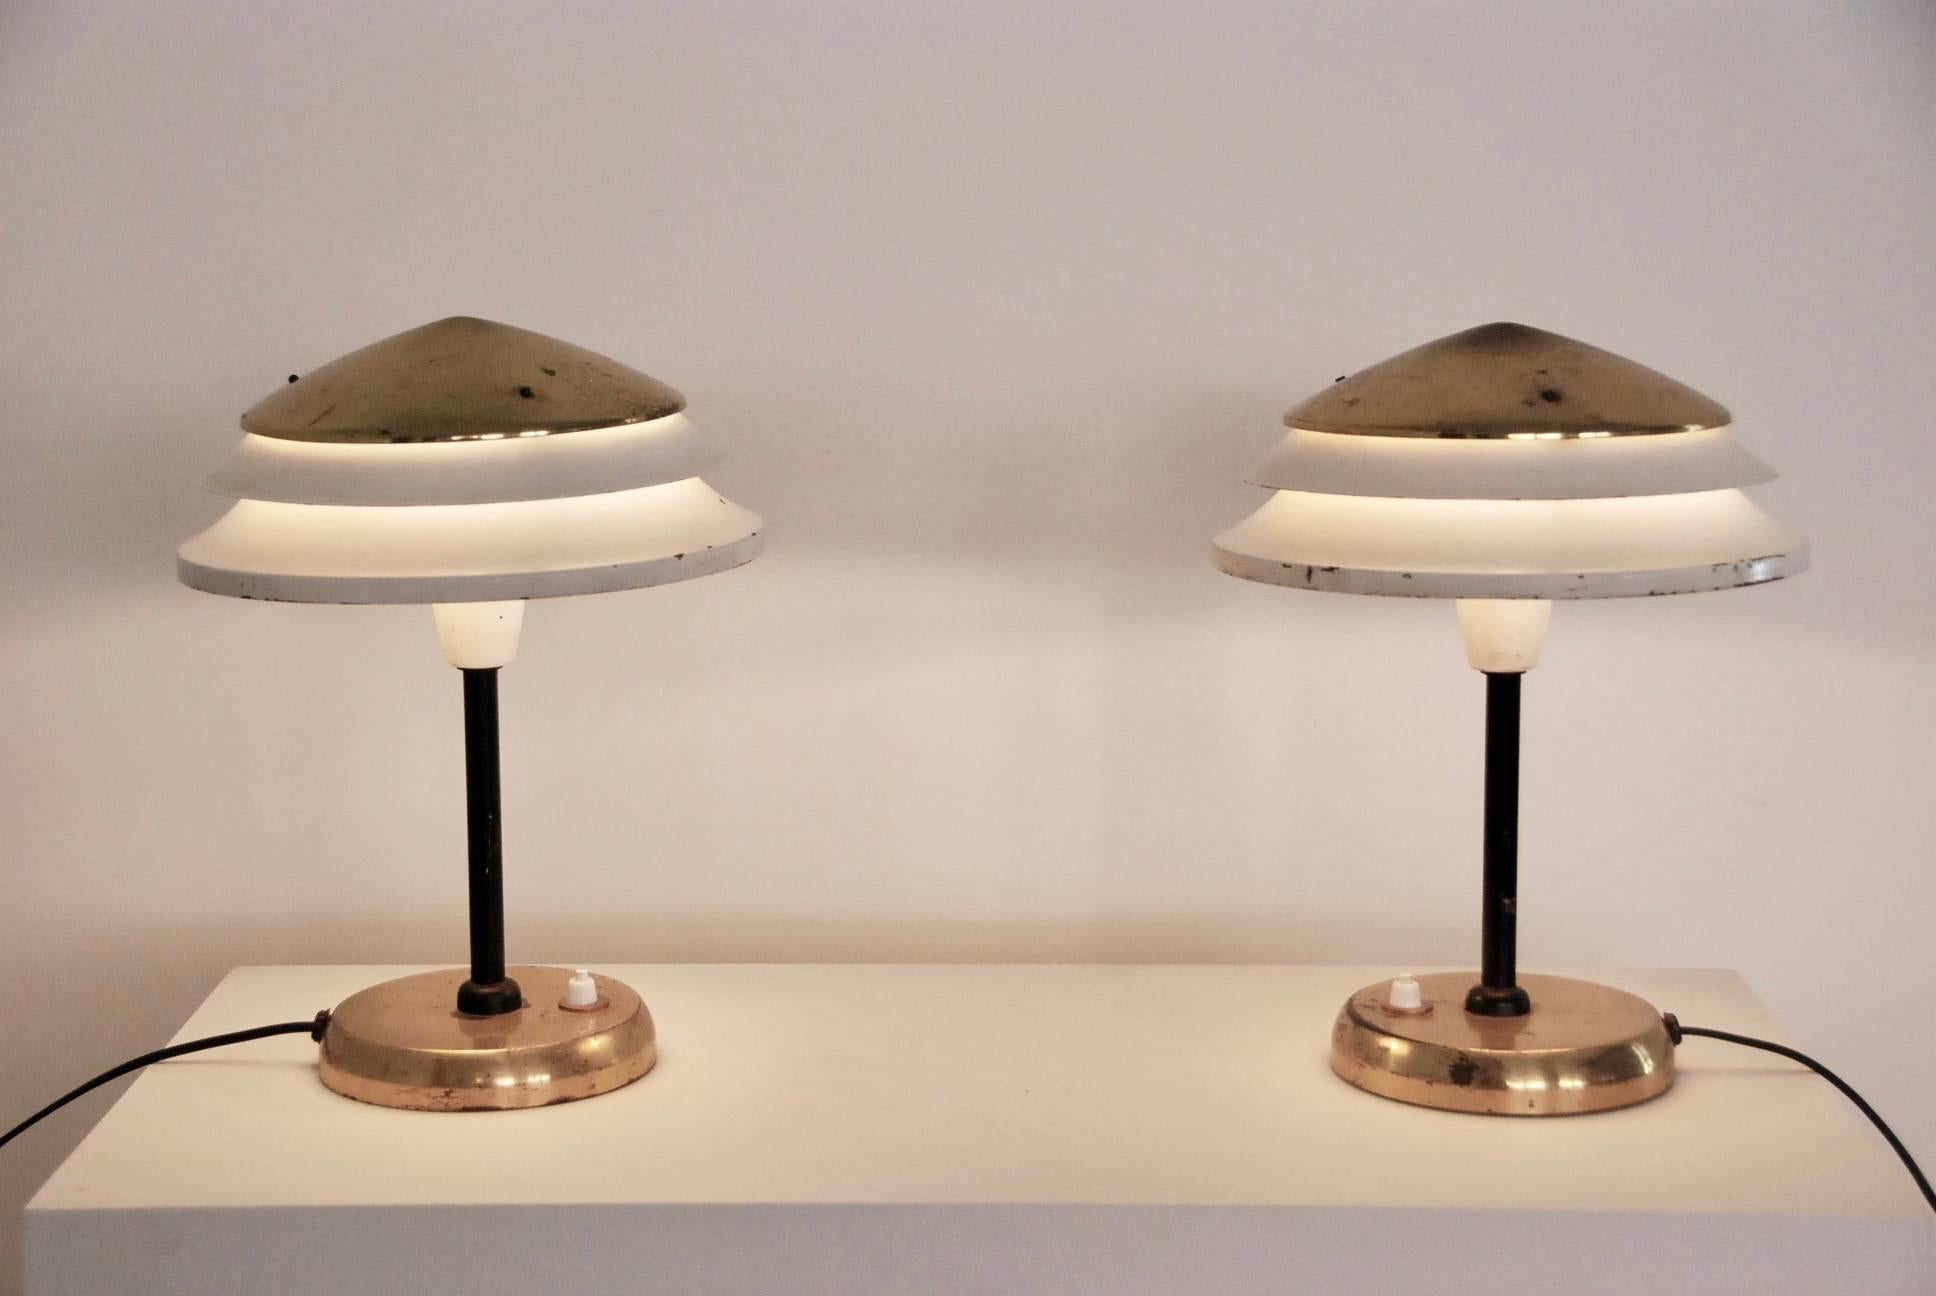 Very nice and decorative pair of table lamps with shield in shape of small roof produced by Zukov typ 6643, 
Czechoslovakia, 1970s-1980s. All original condition.